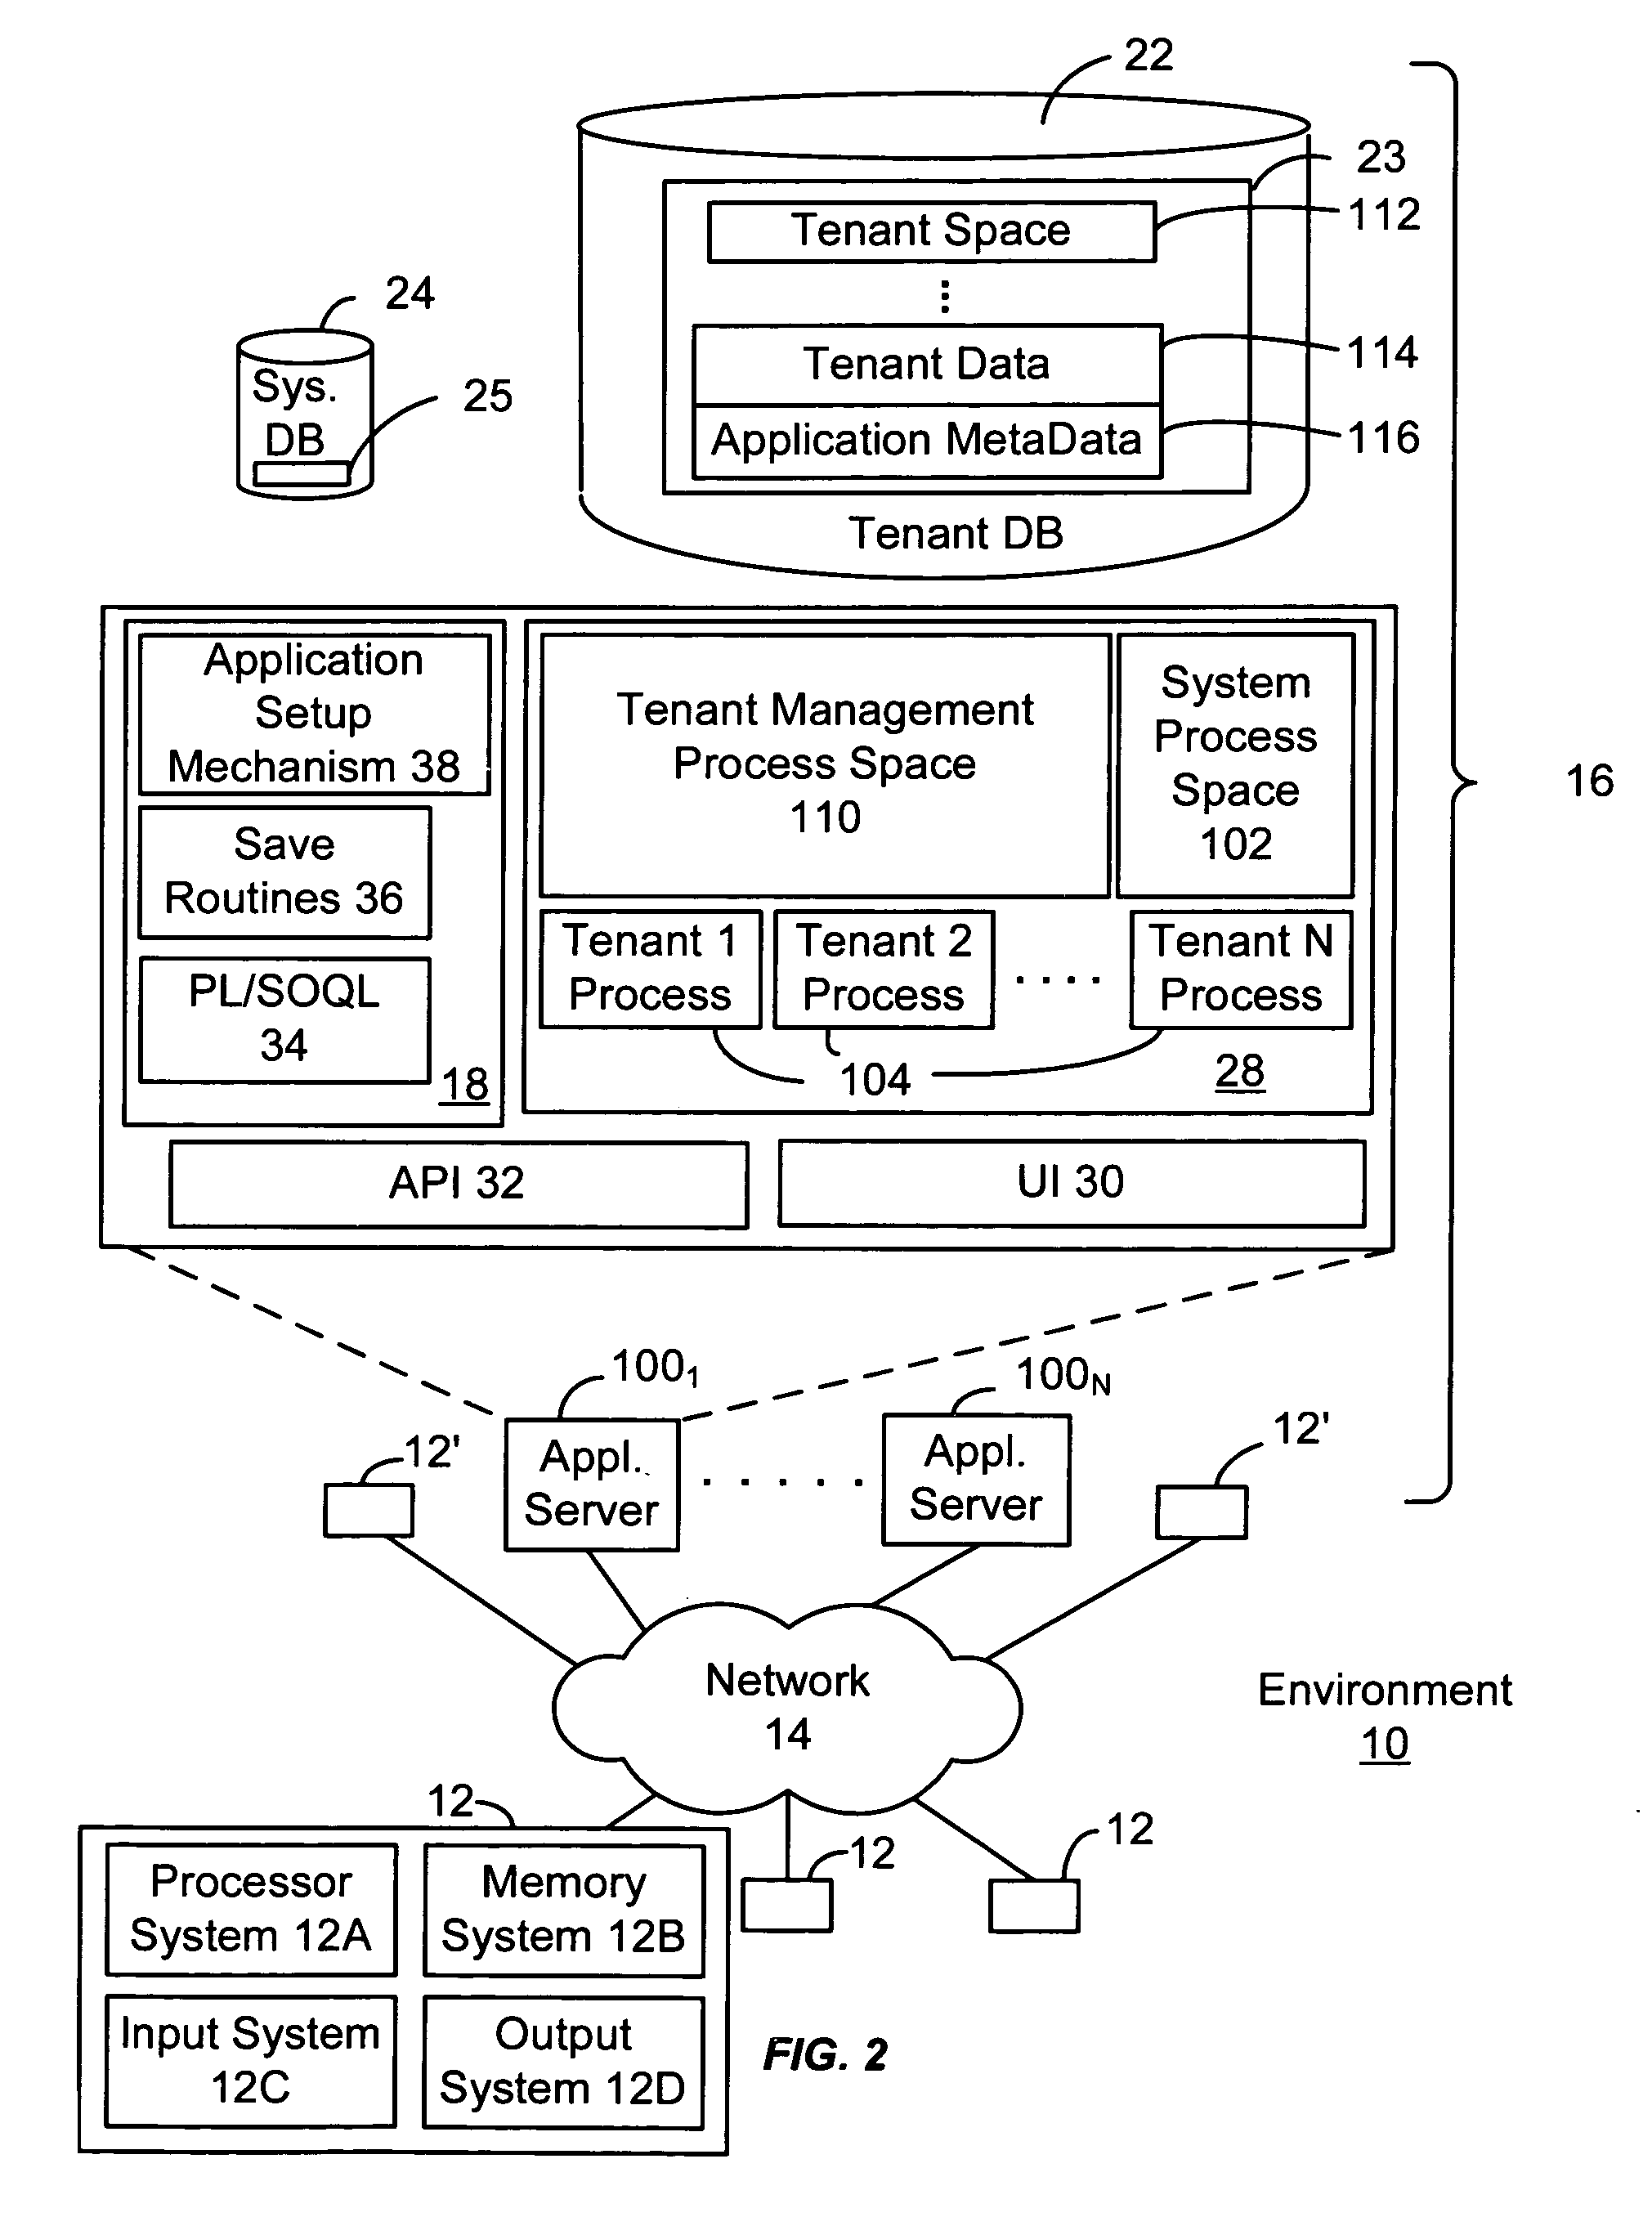 Method and system for automatically updating a software QA Test repository